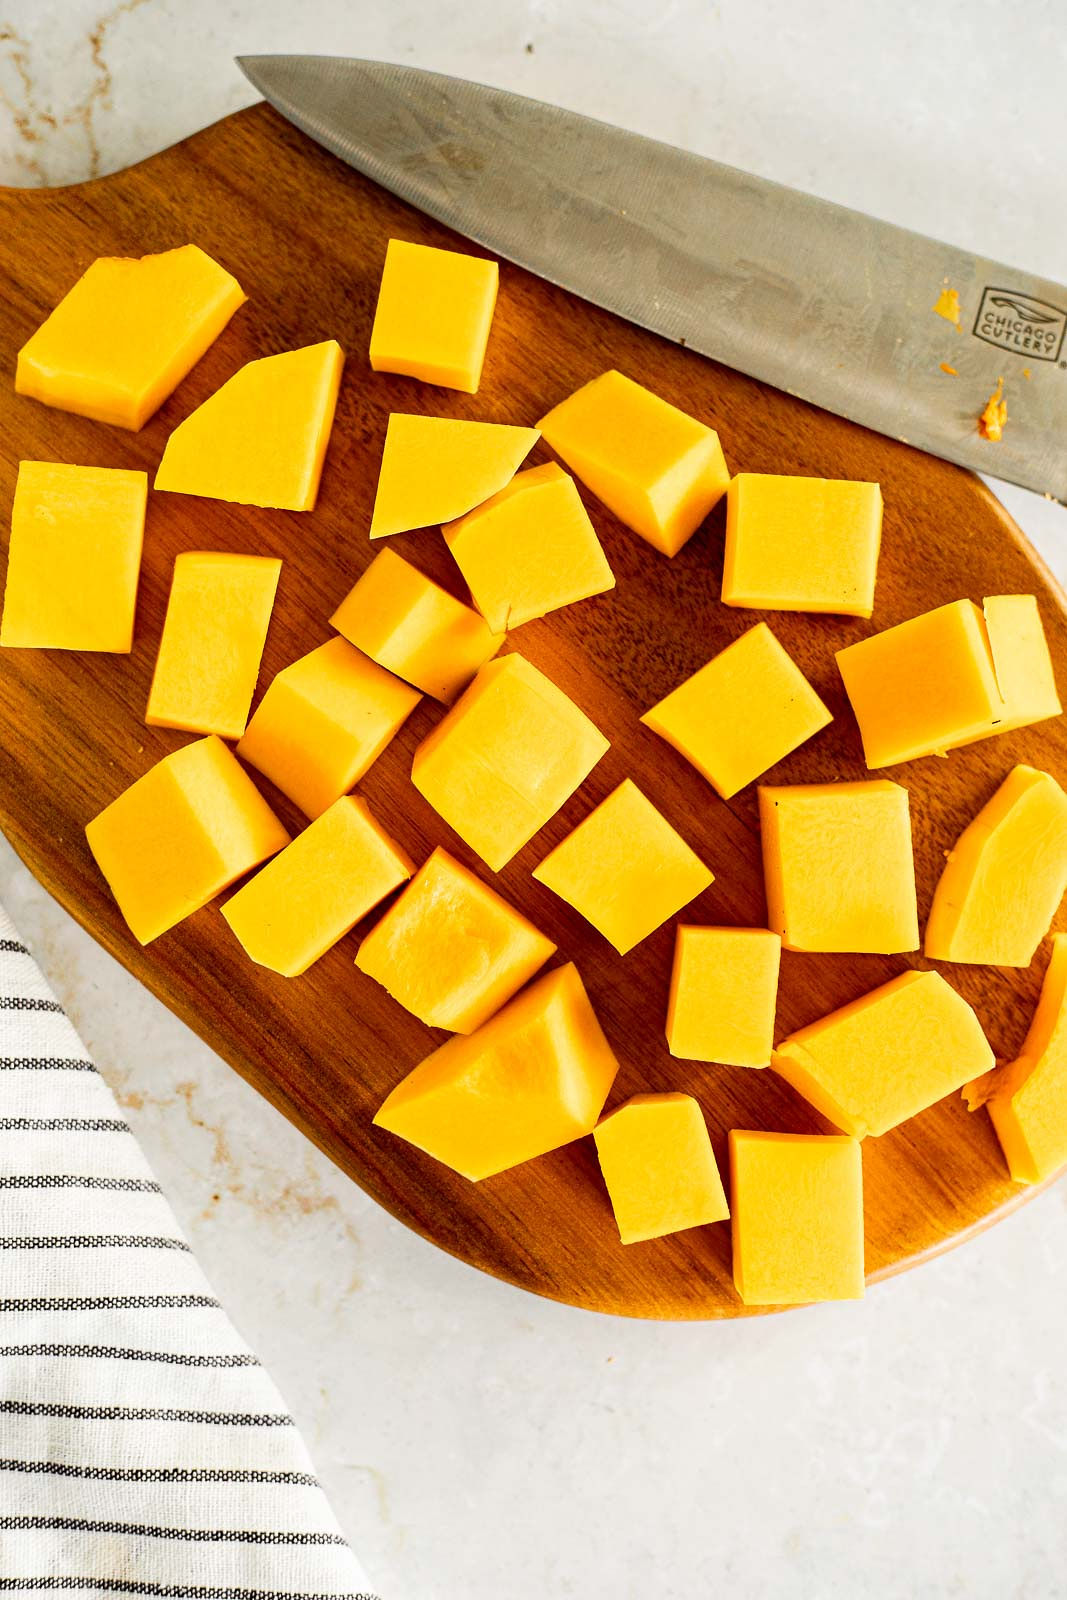 Butternut squash cut into cubes on a cutting board with a chef's knife.